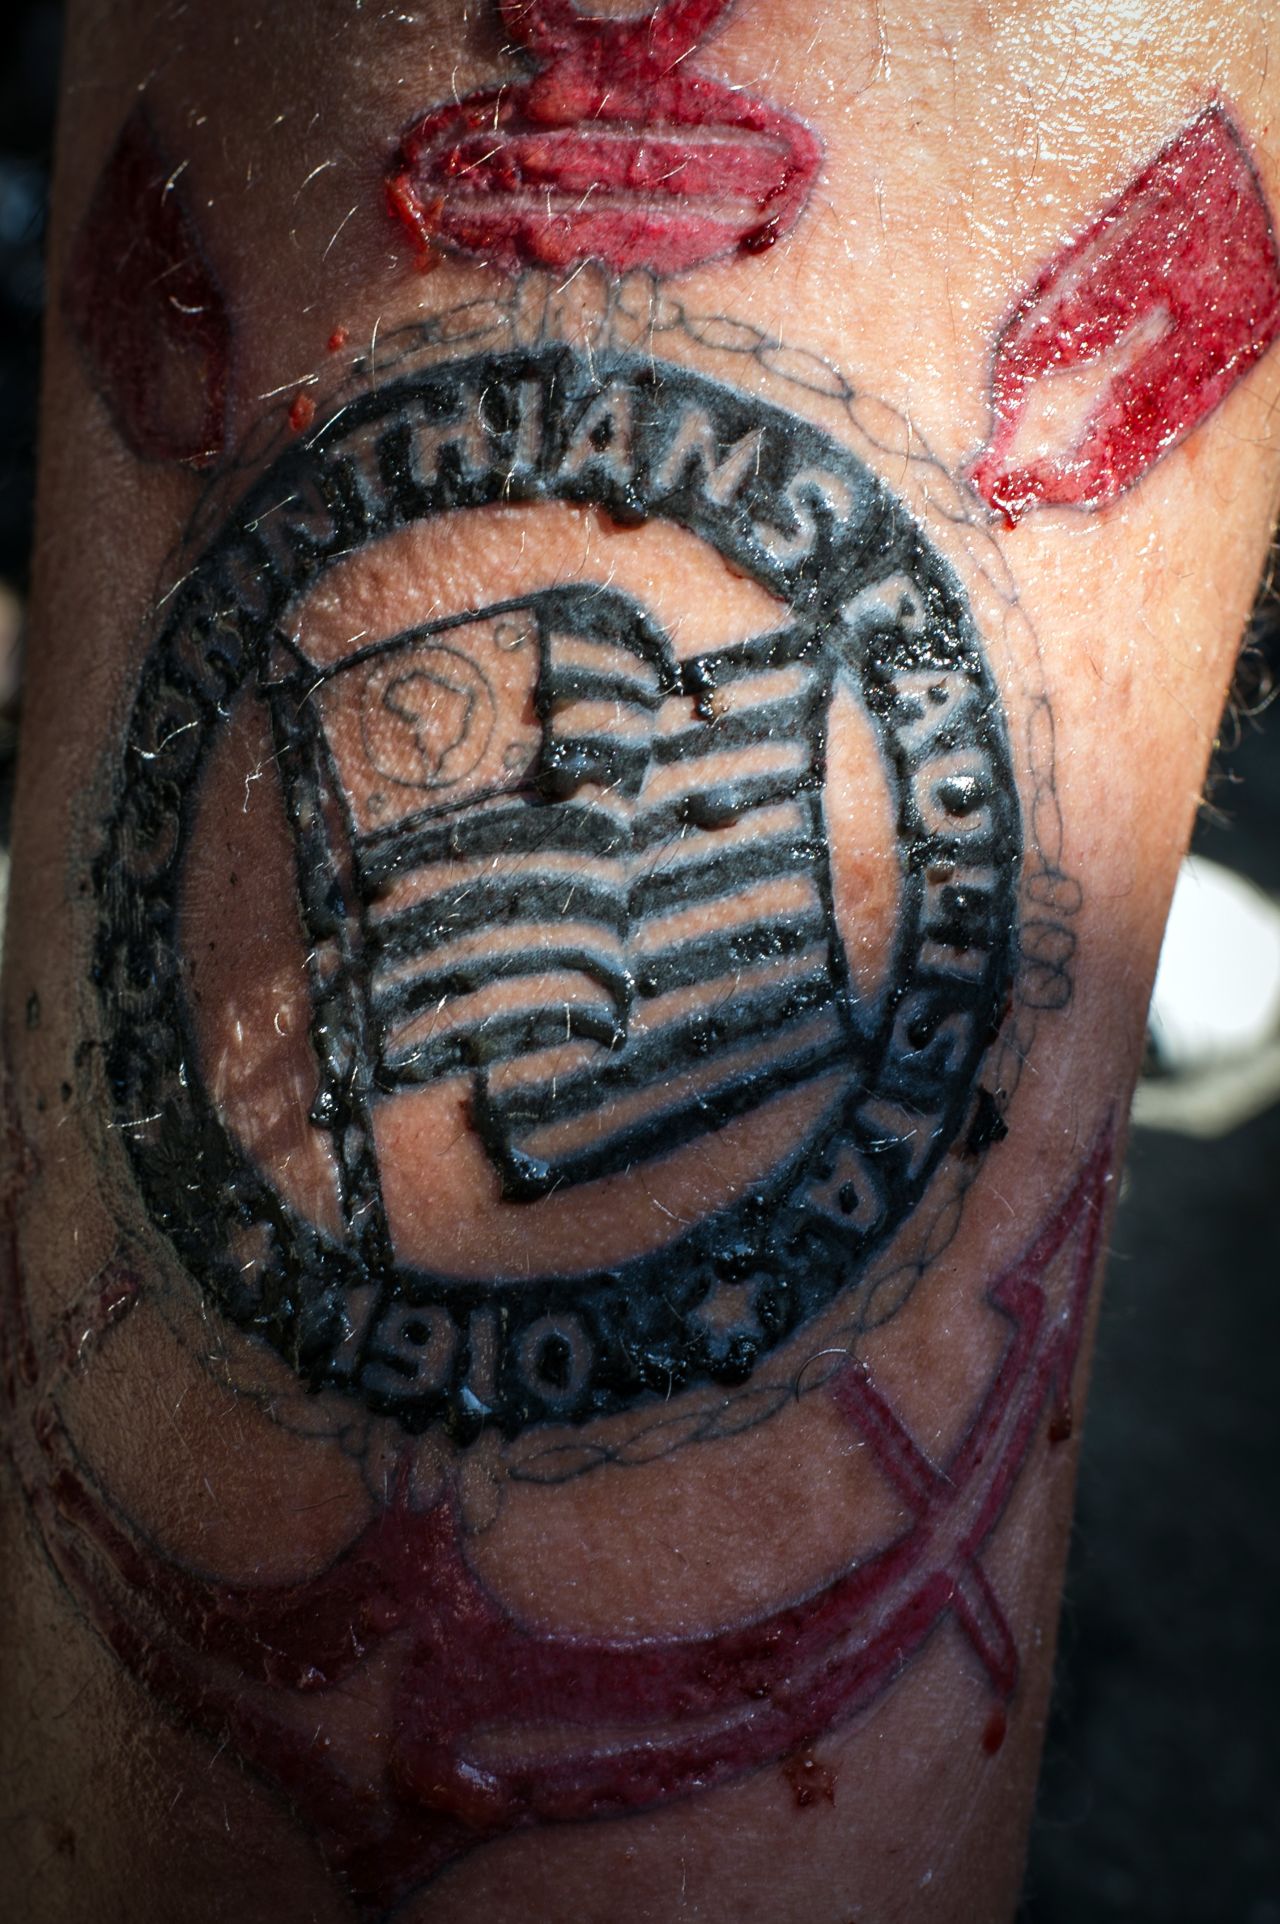 A Corinthians fans shows off his tattoo with the emblem of the team in Sao Paulo.